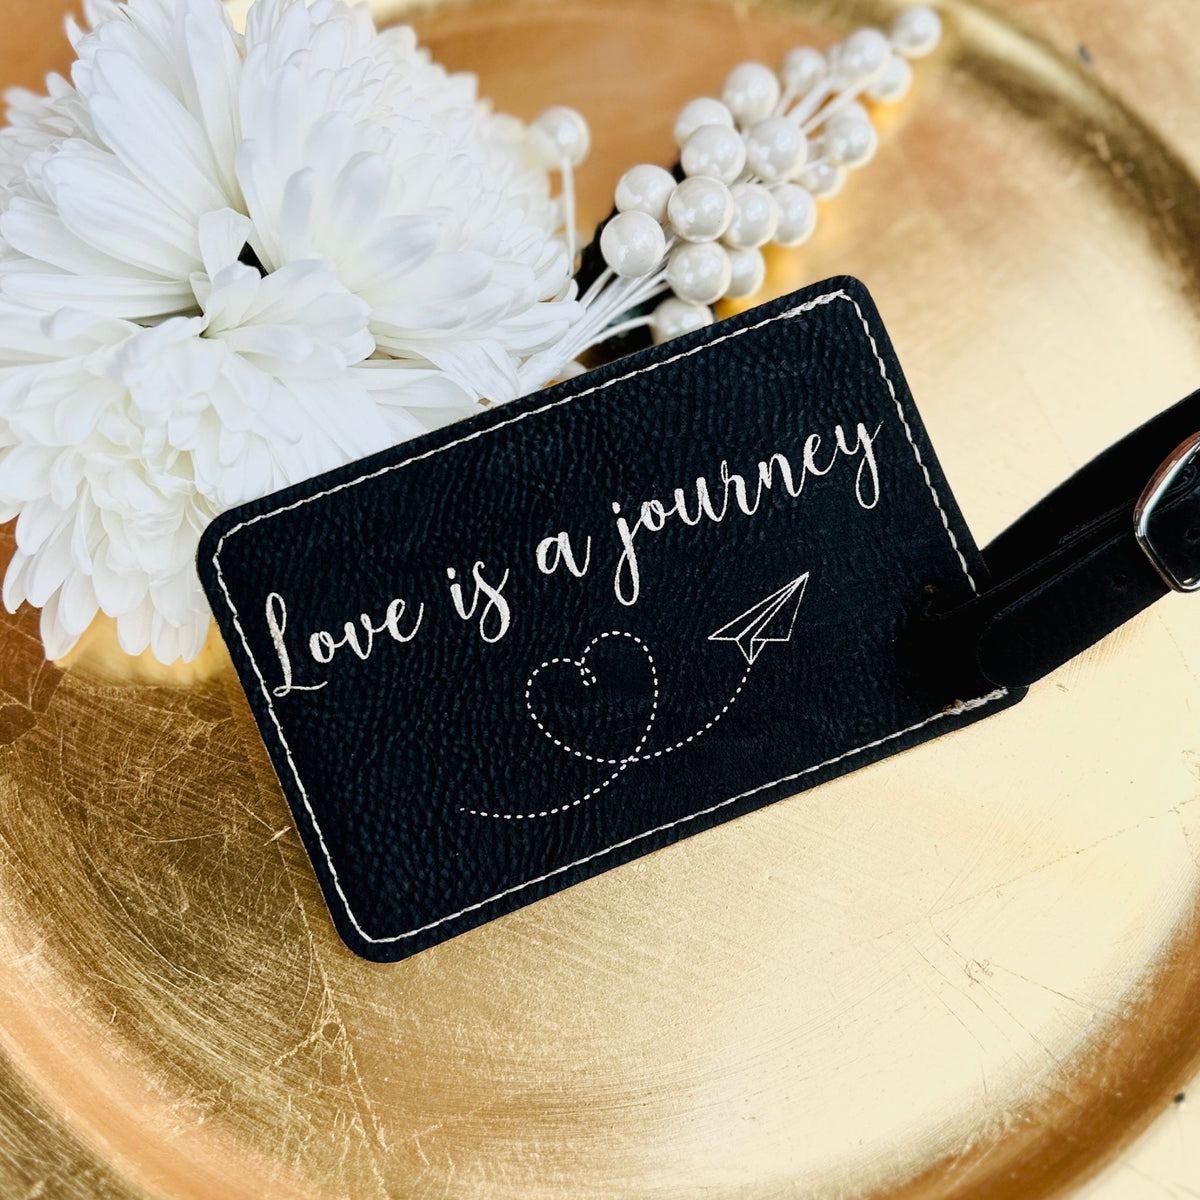 Love Is A Journey Luggage Tag - Forever Wedding Favors